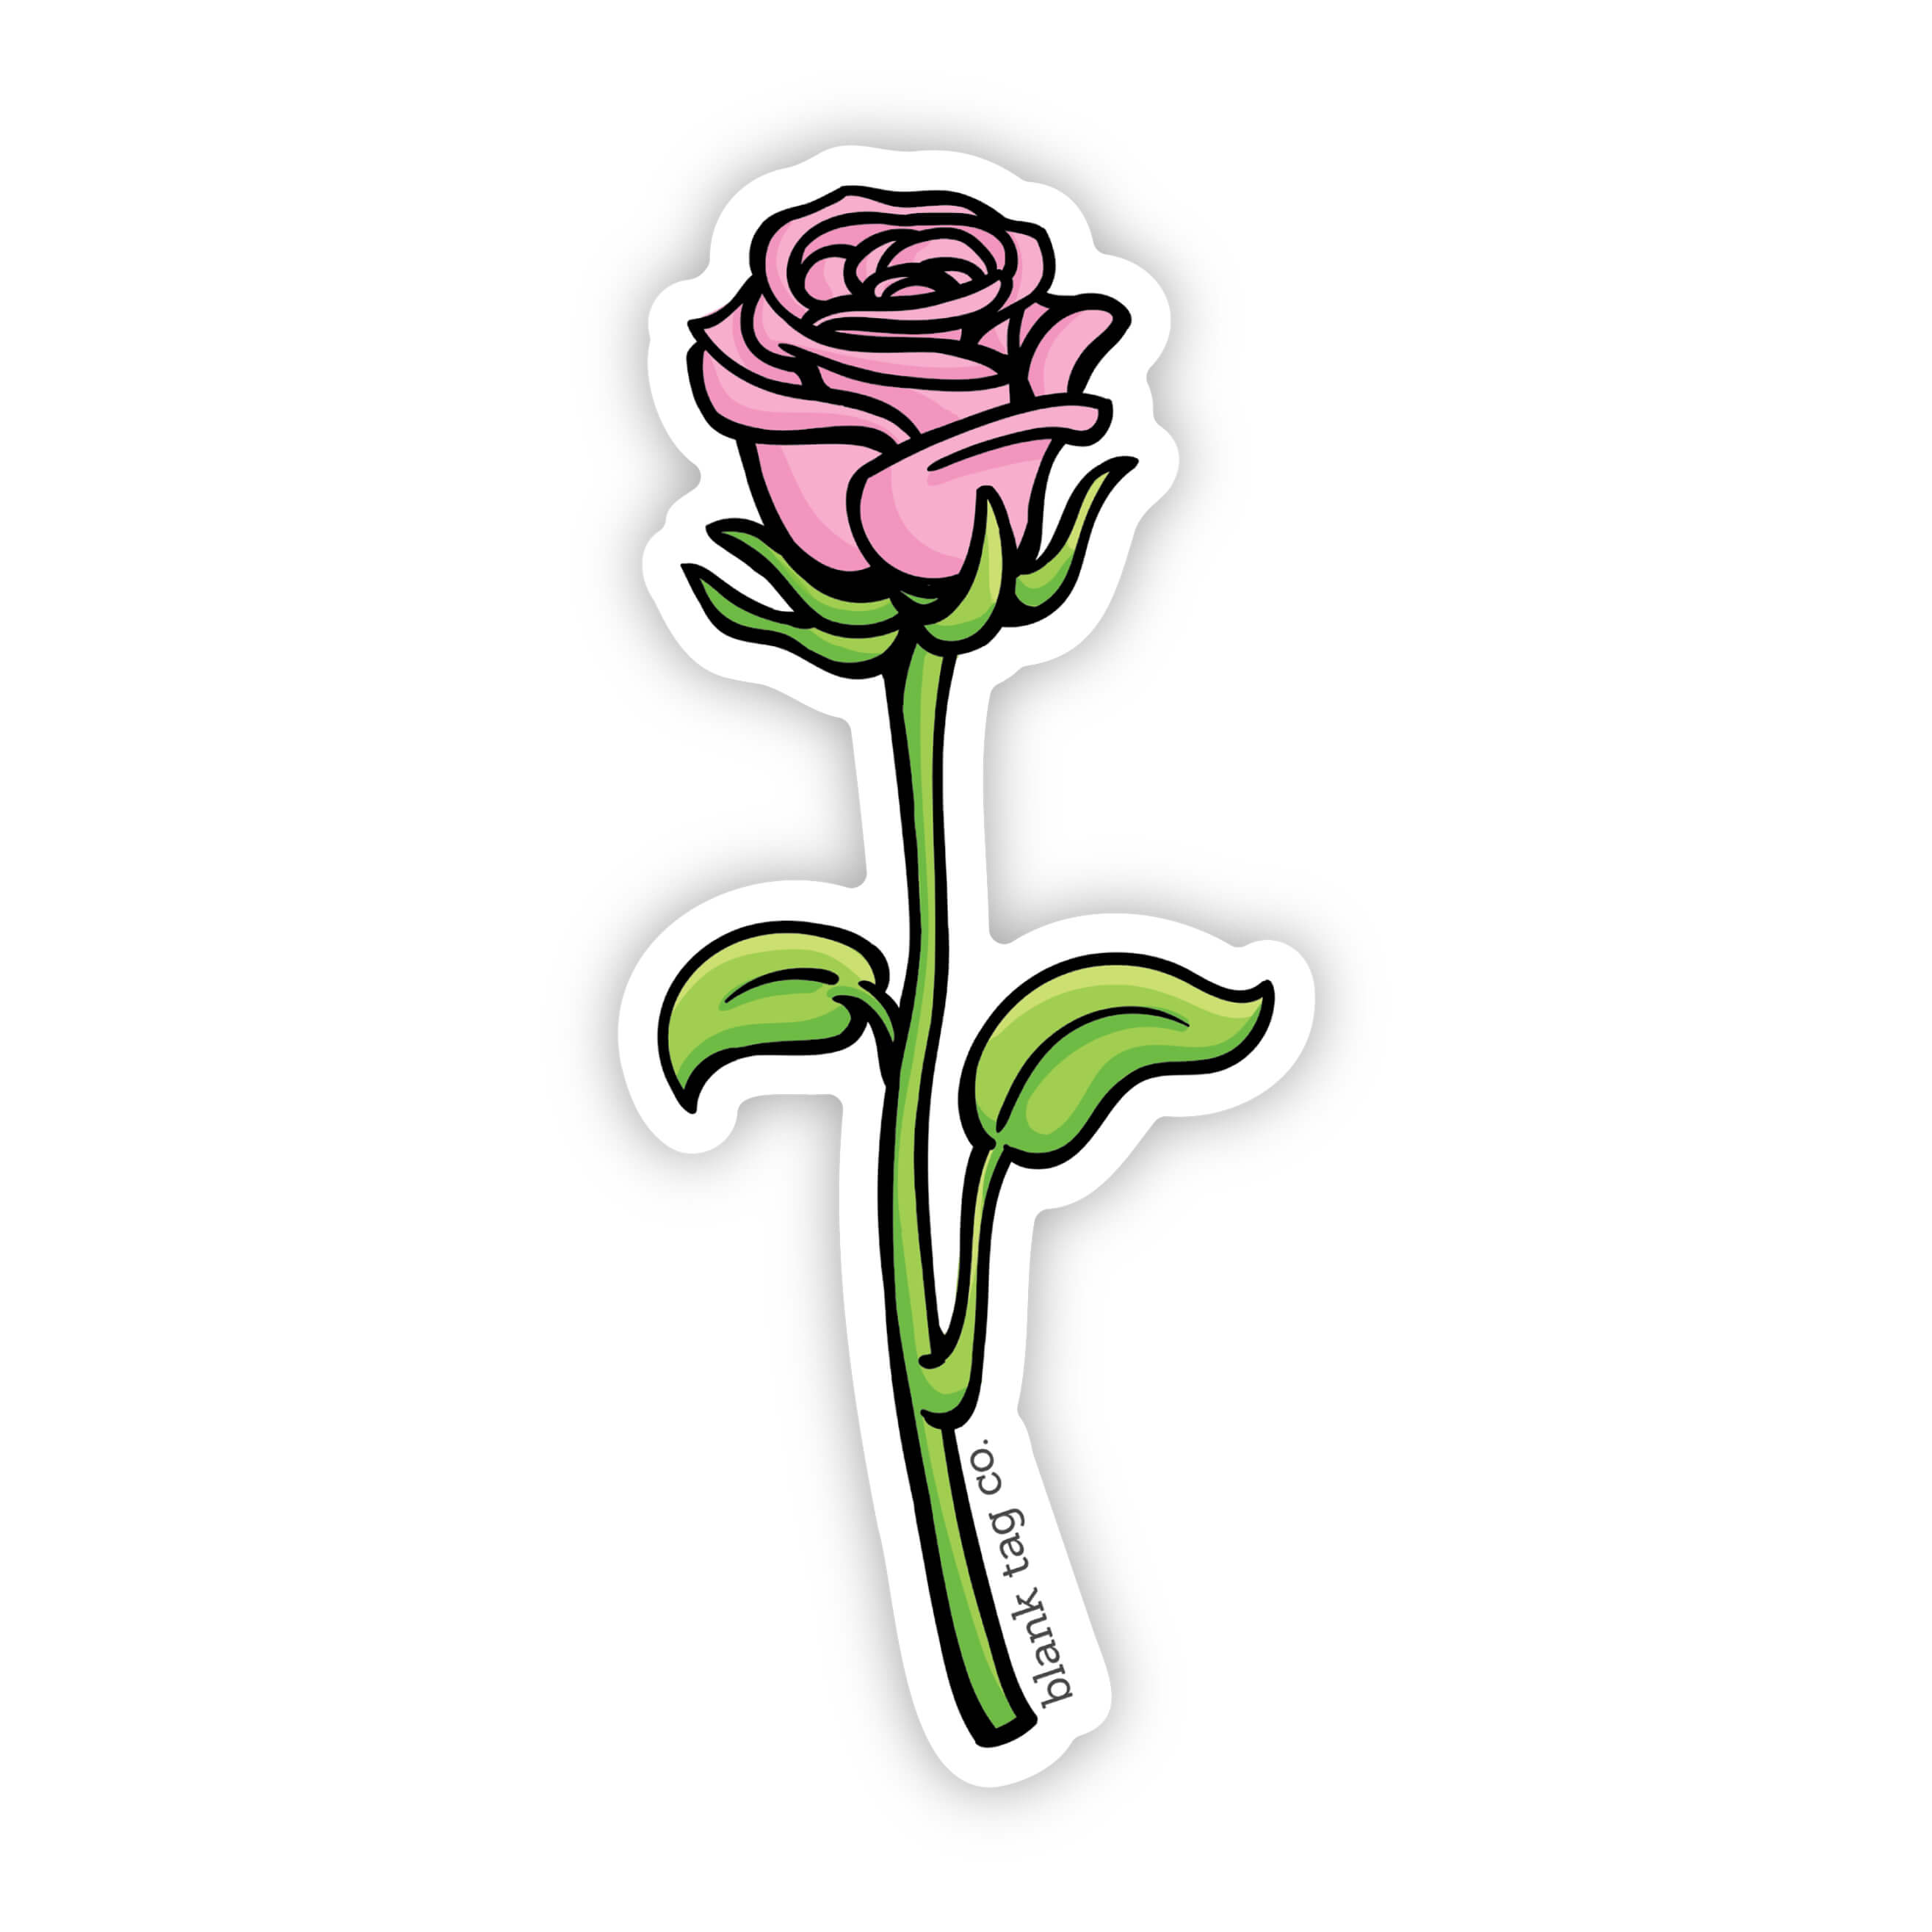 The Pink Rose Sticker